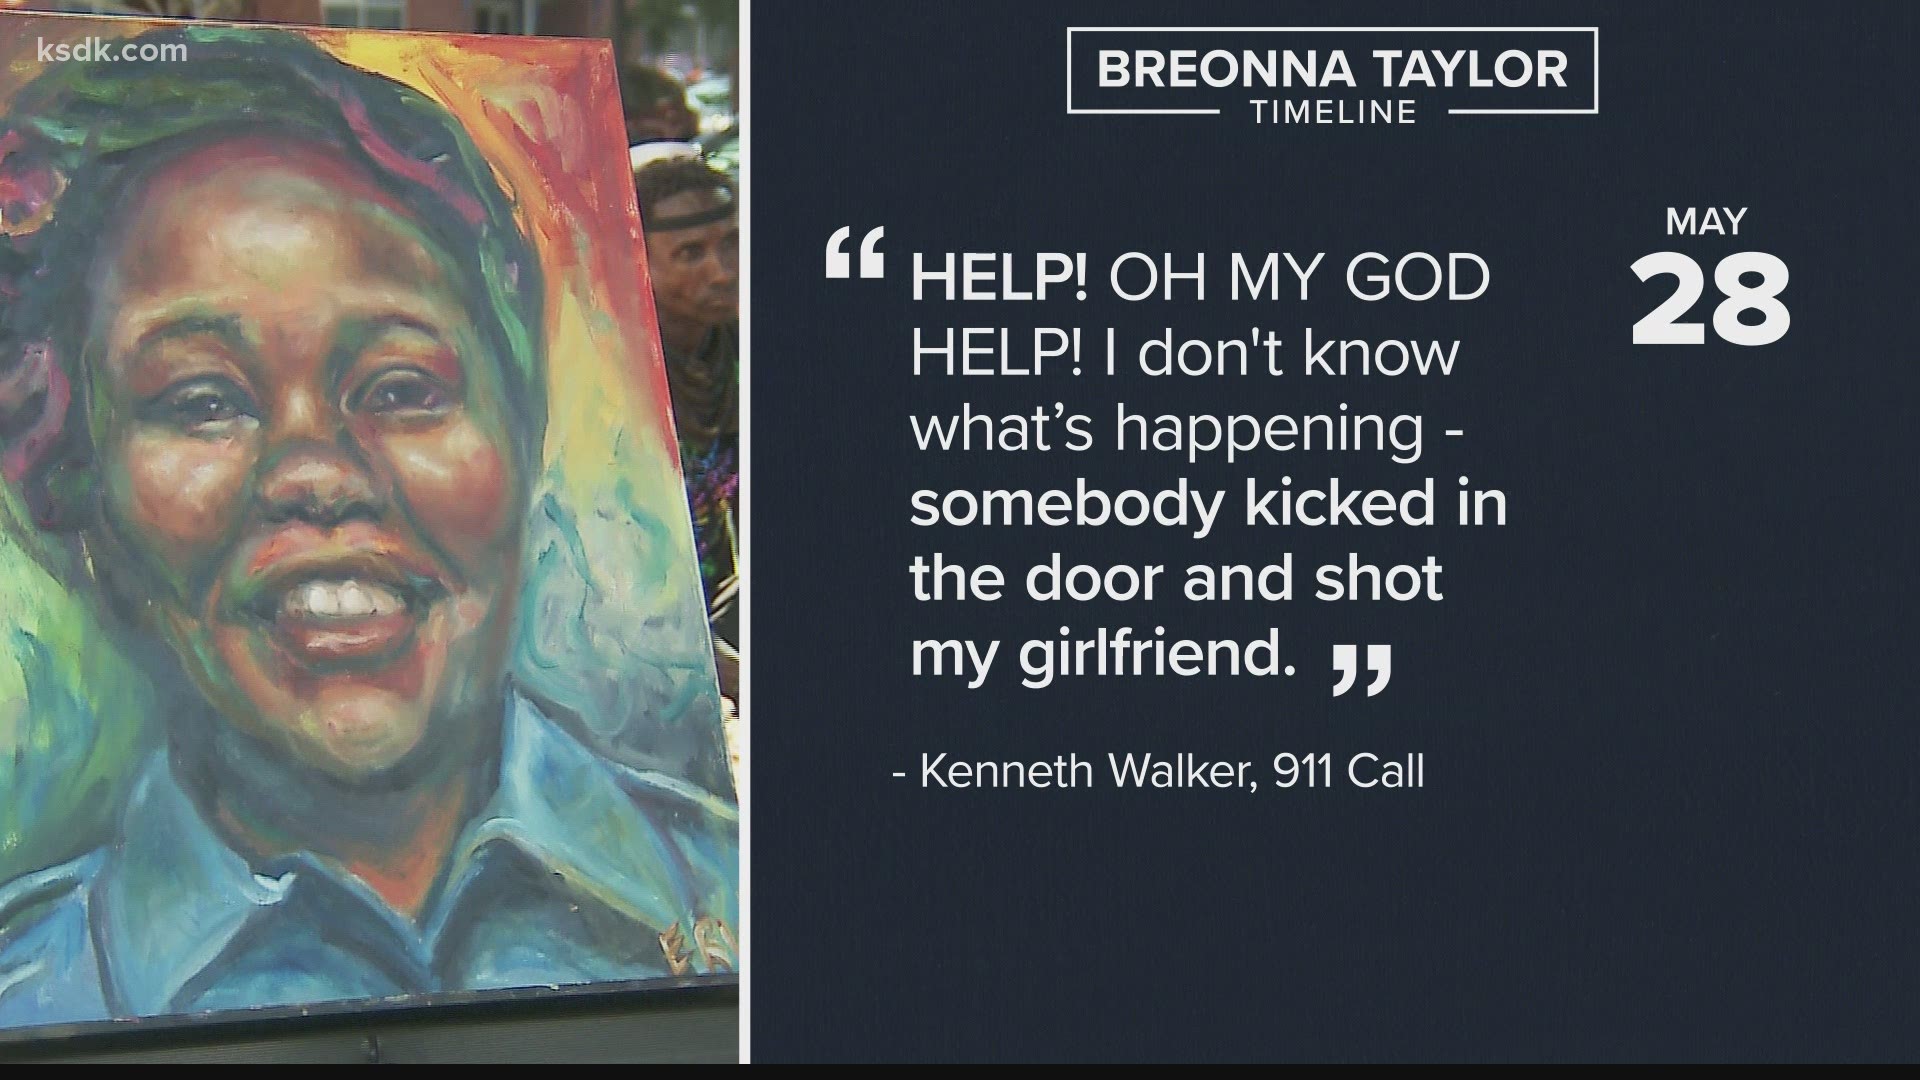 Revisiting what happened the morning Breonna Taylor was killed and where we are now